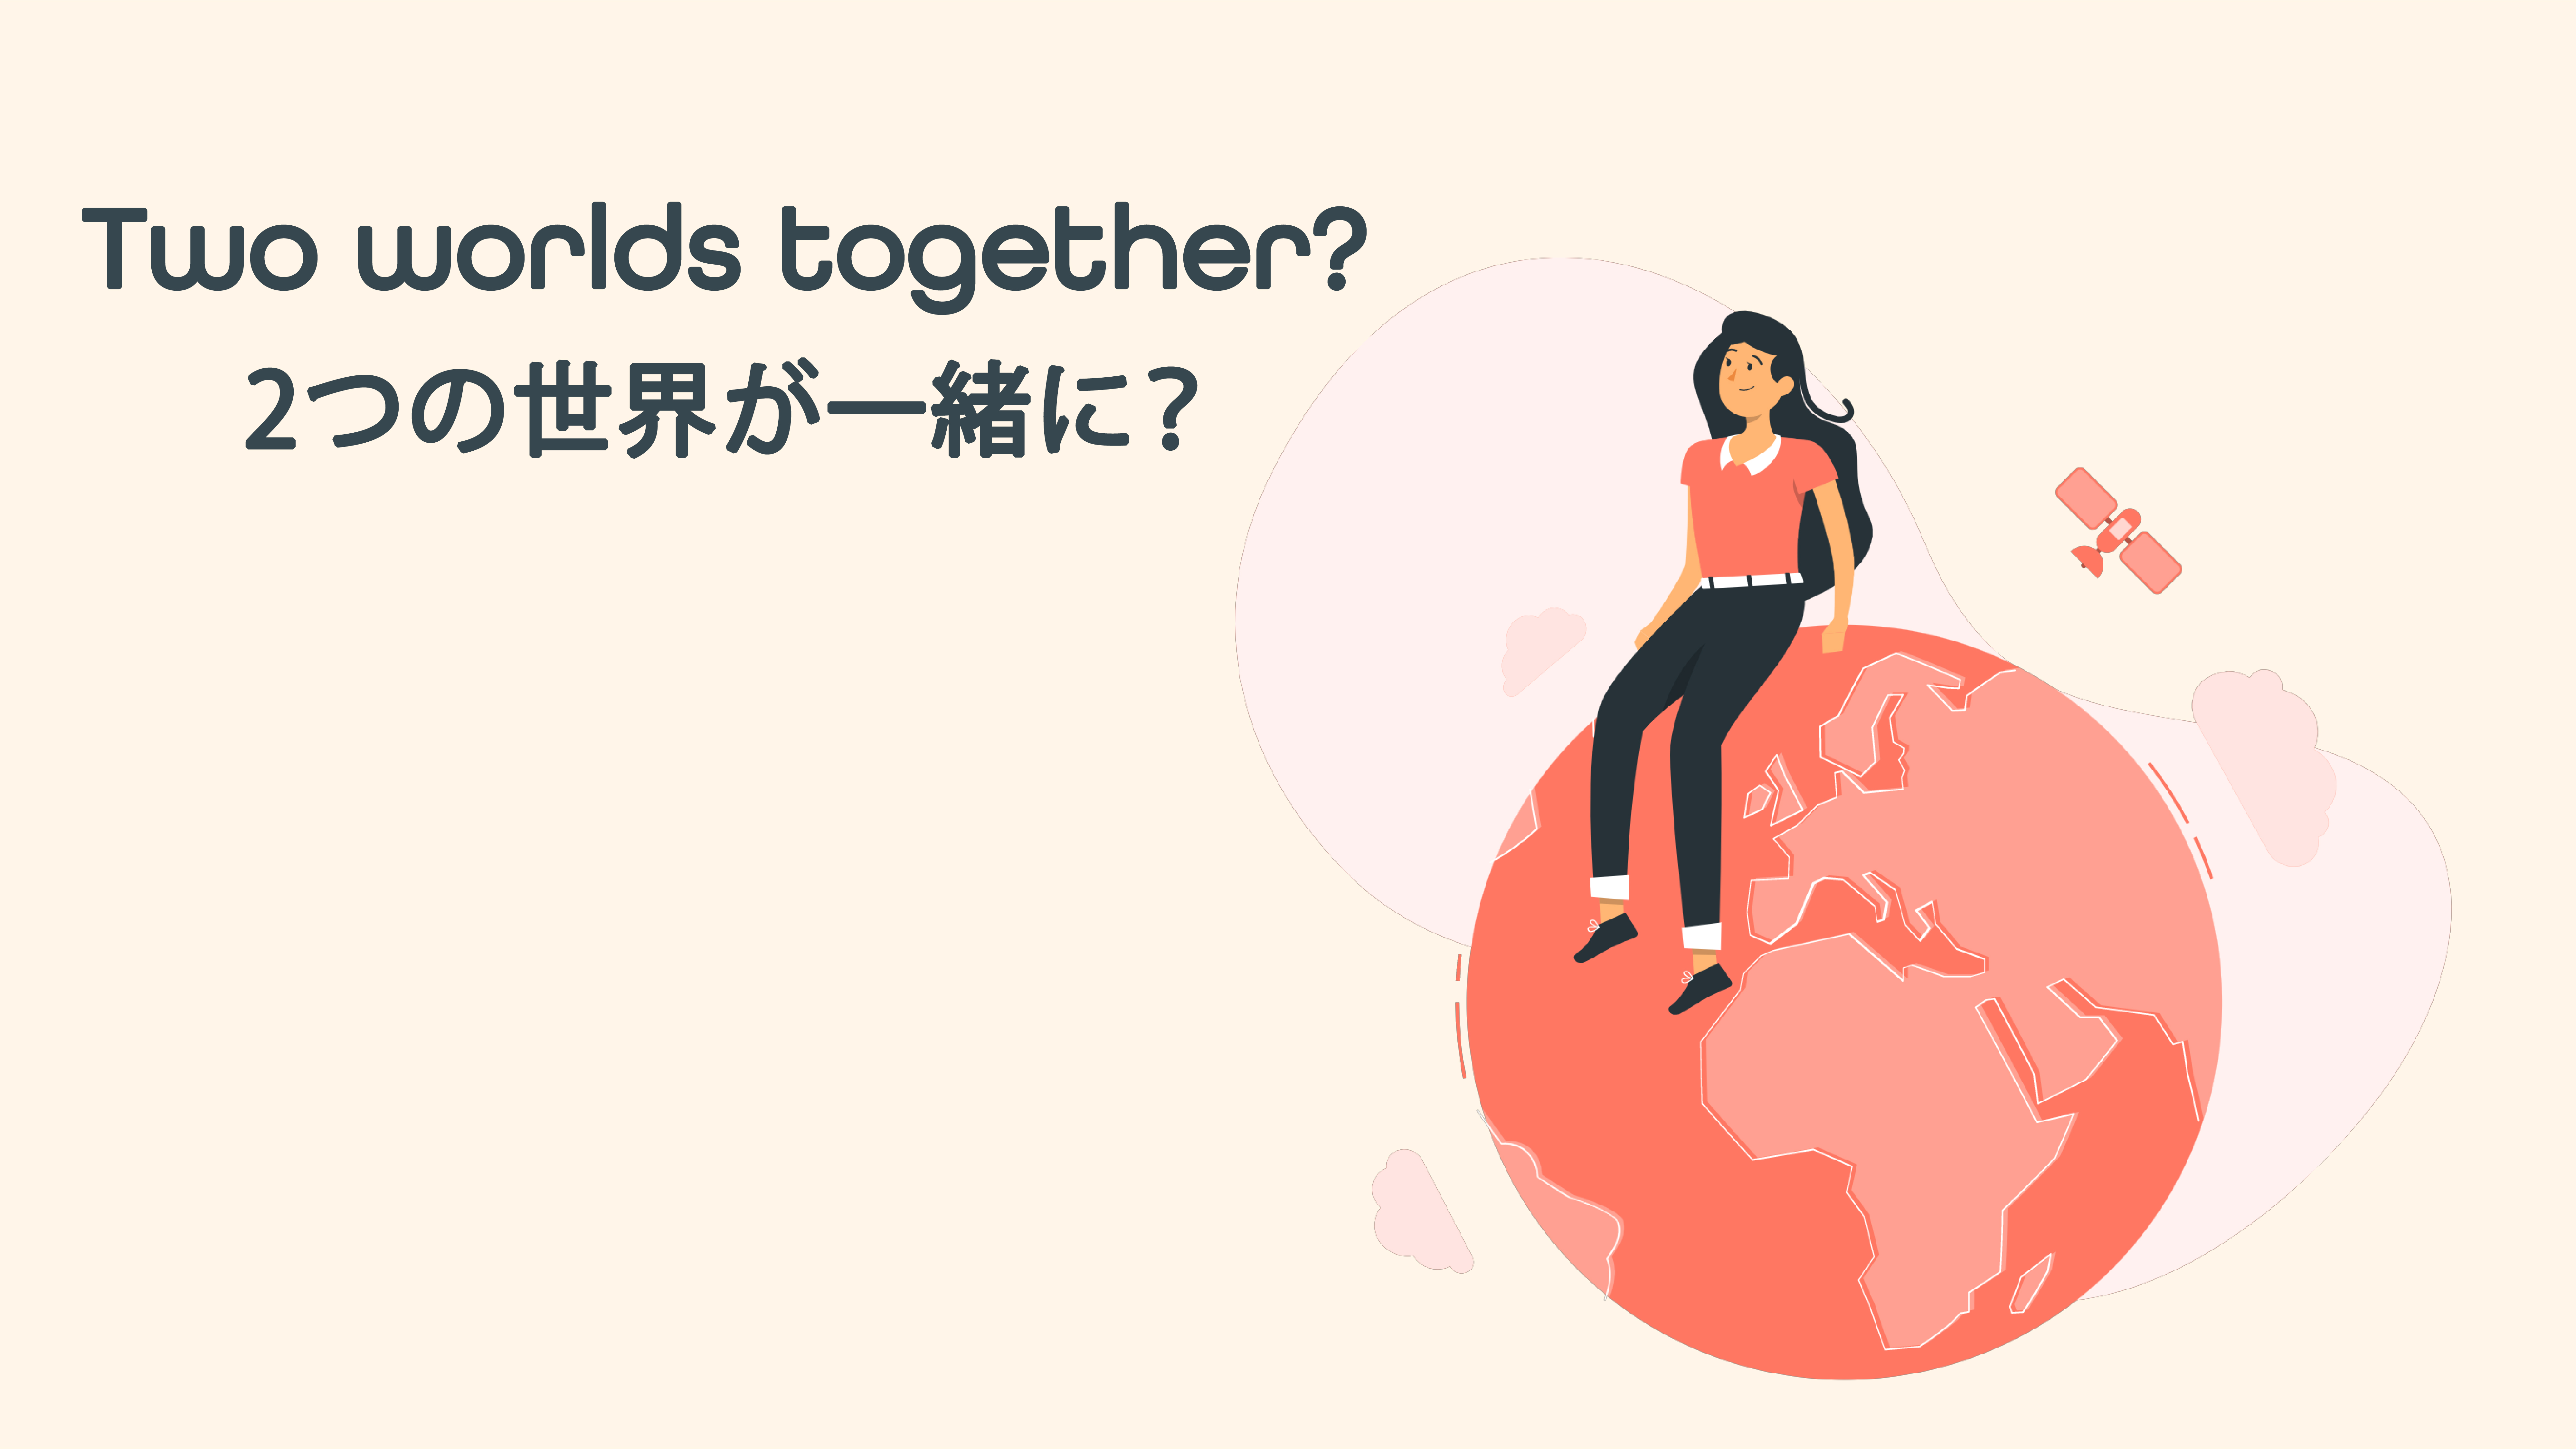 Two worlds together? 2つの世界が一緒に？